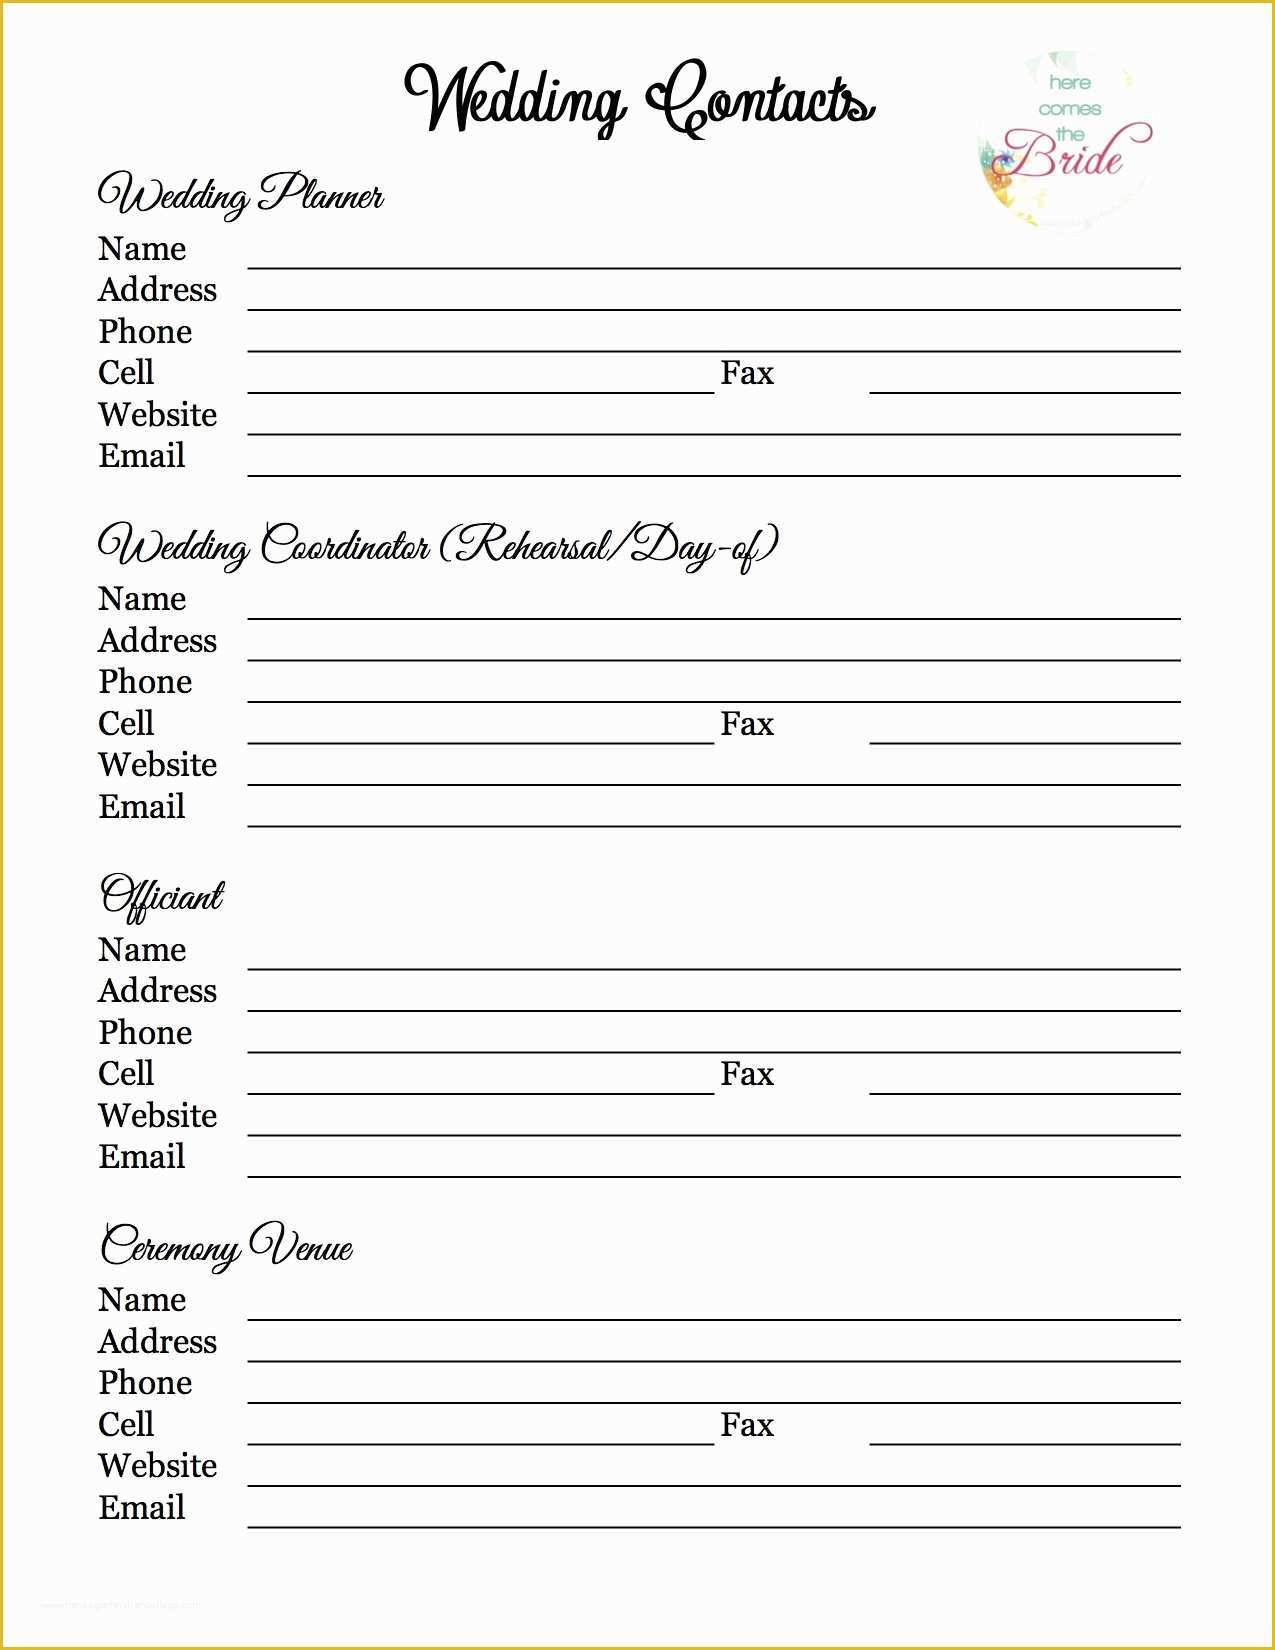 free-printable-wedding-planning-templates-of-wedding-planner-with-free